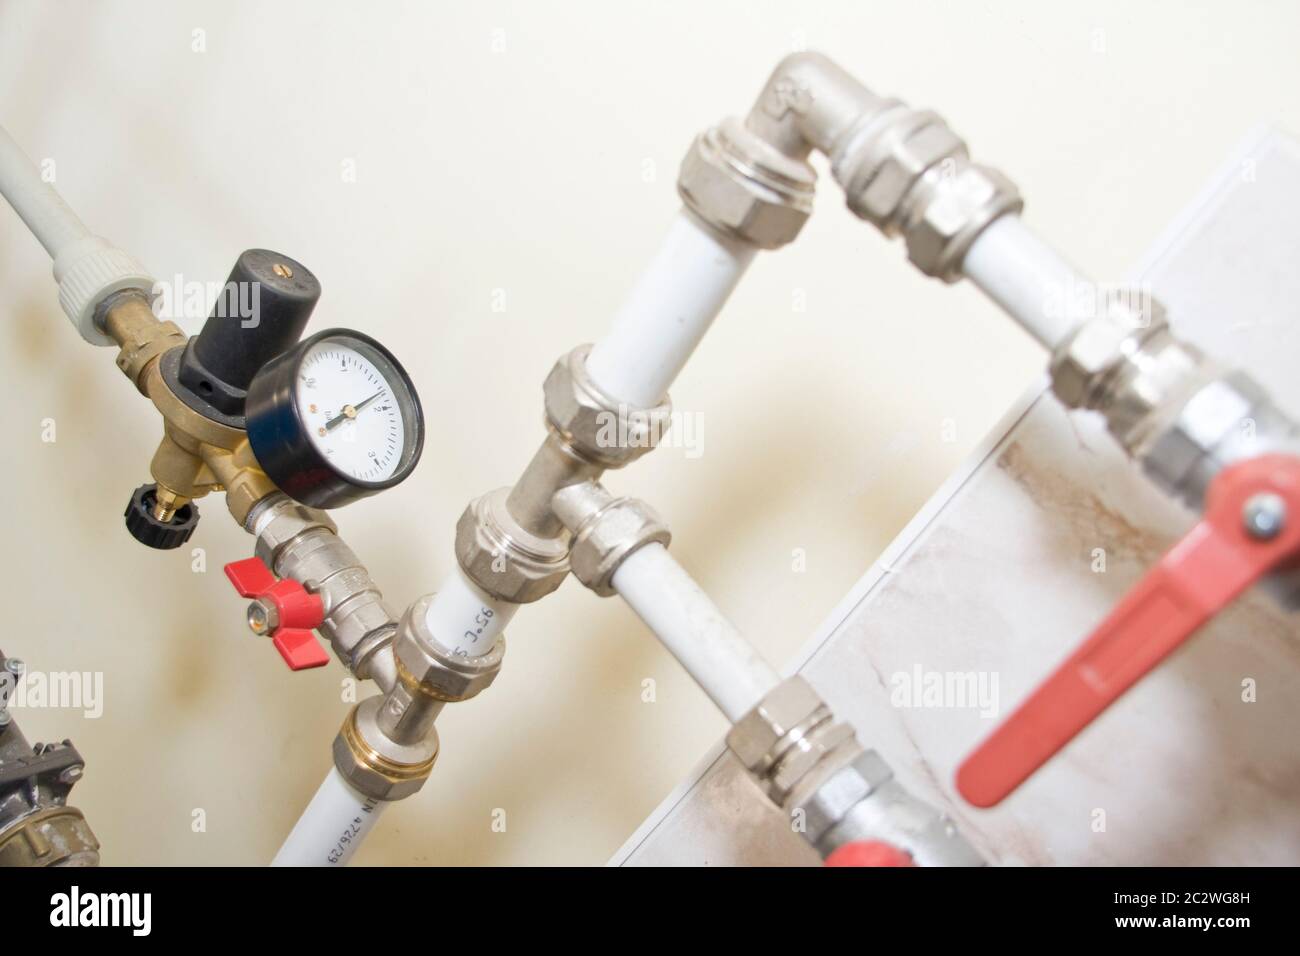 Manometer, pipes and armature Stock Photo